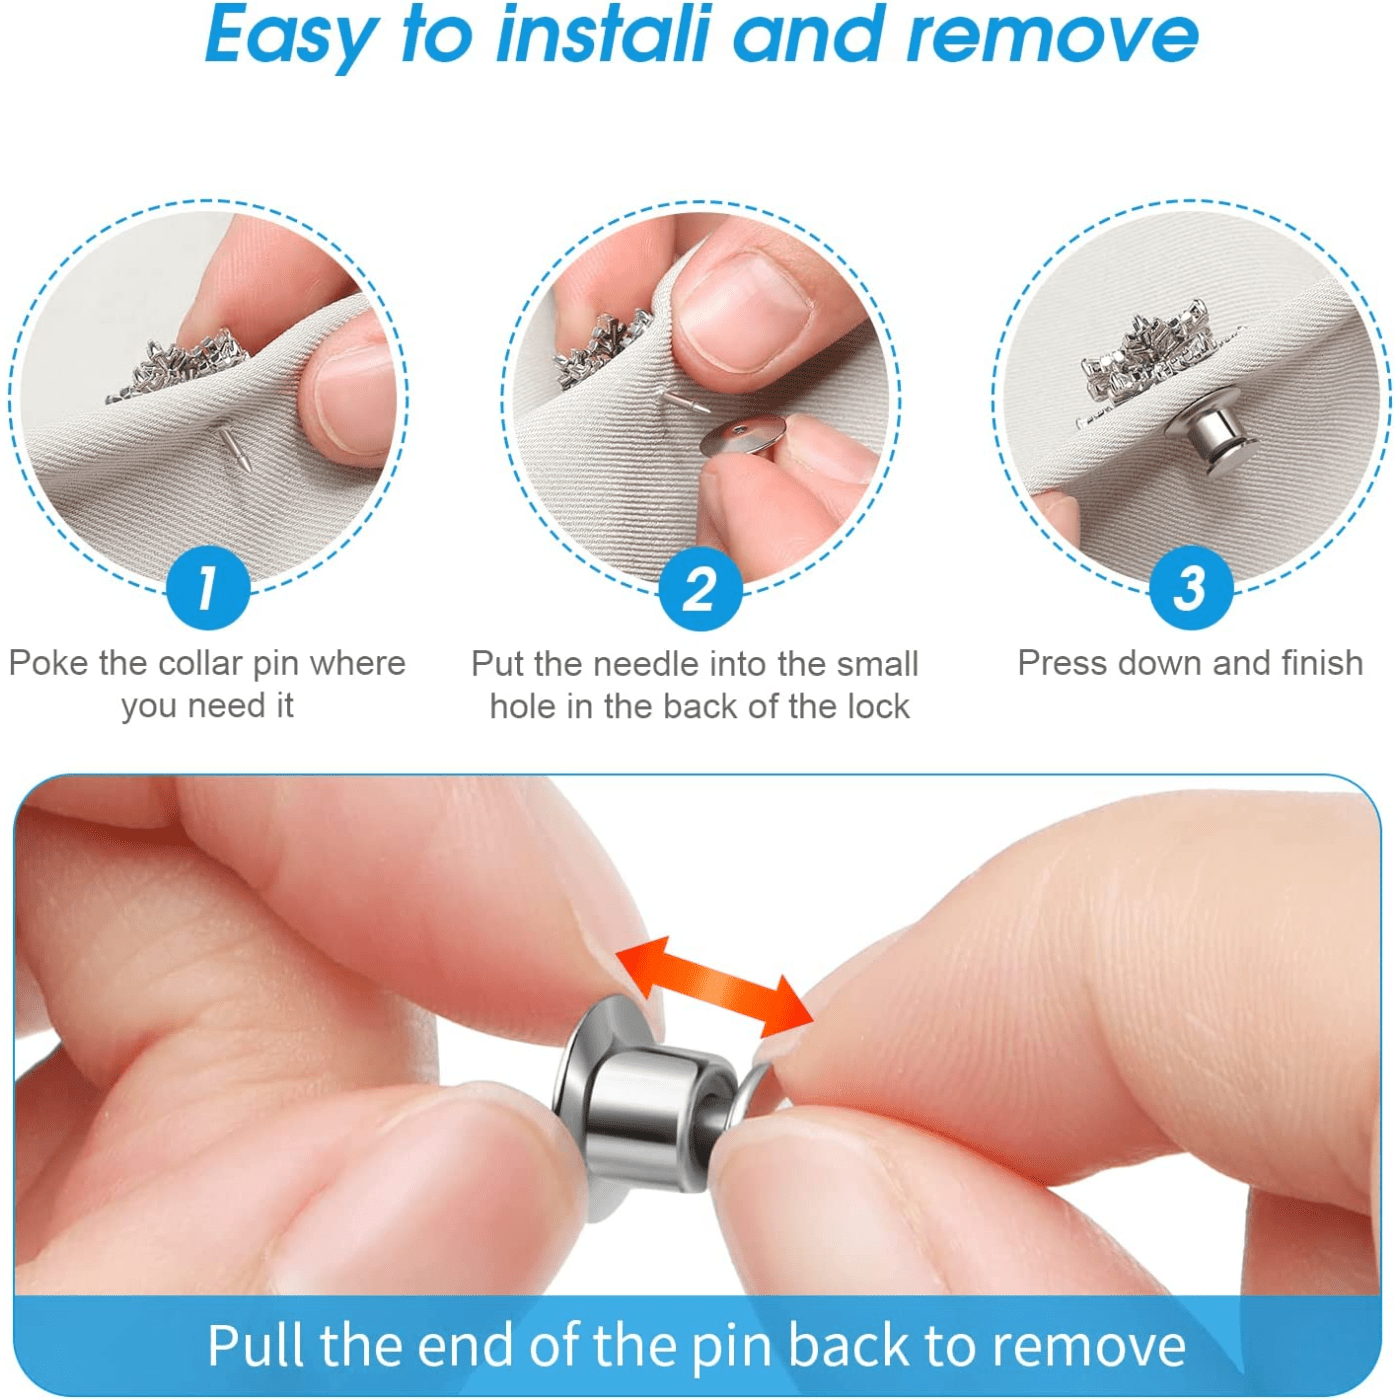 Locking Pin Backs-Keep Your Valuable Pins Secure